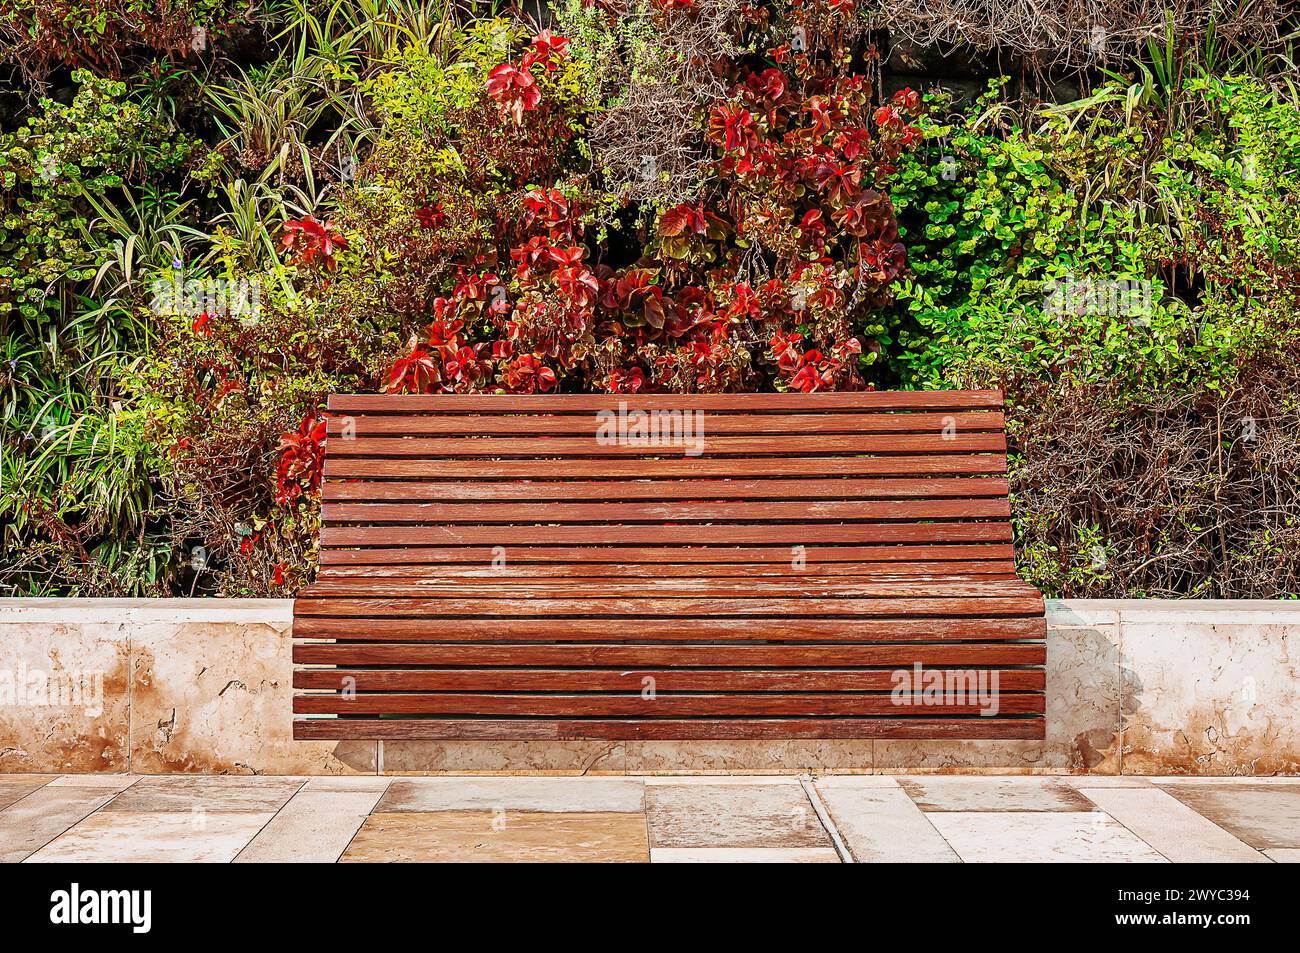 a wooden bench in Al Shaheed urban park in Kuwait City Stock Photo